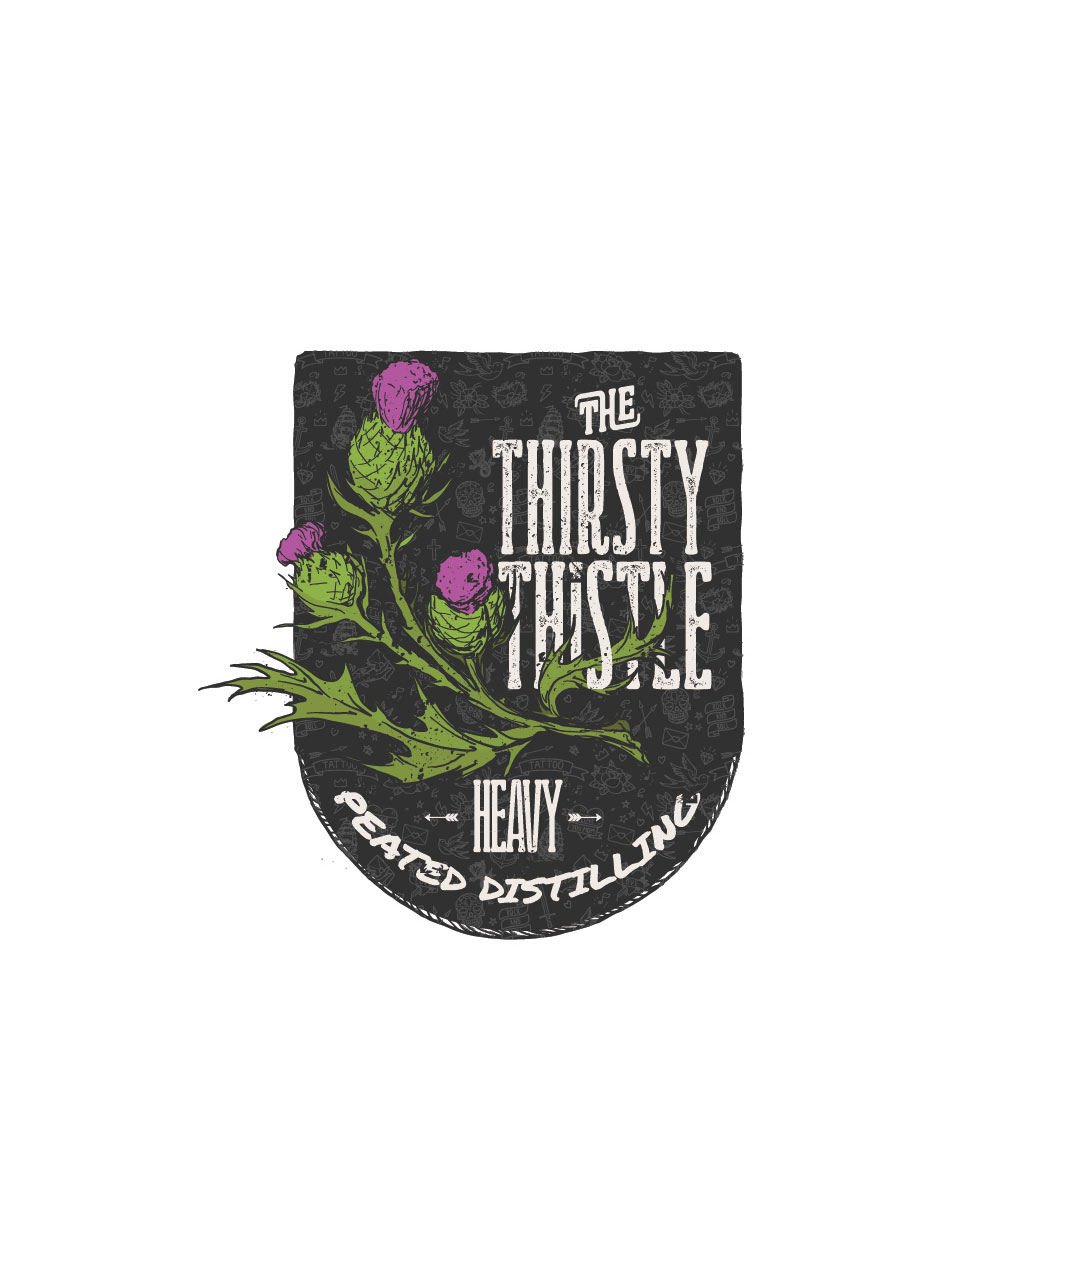 The Thirsty Thirtle - Heavy Peated Malt